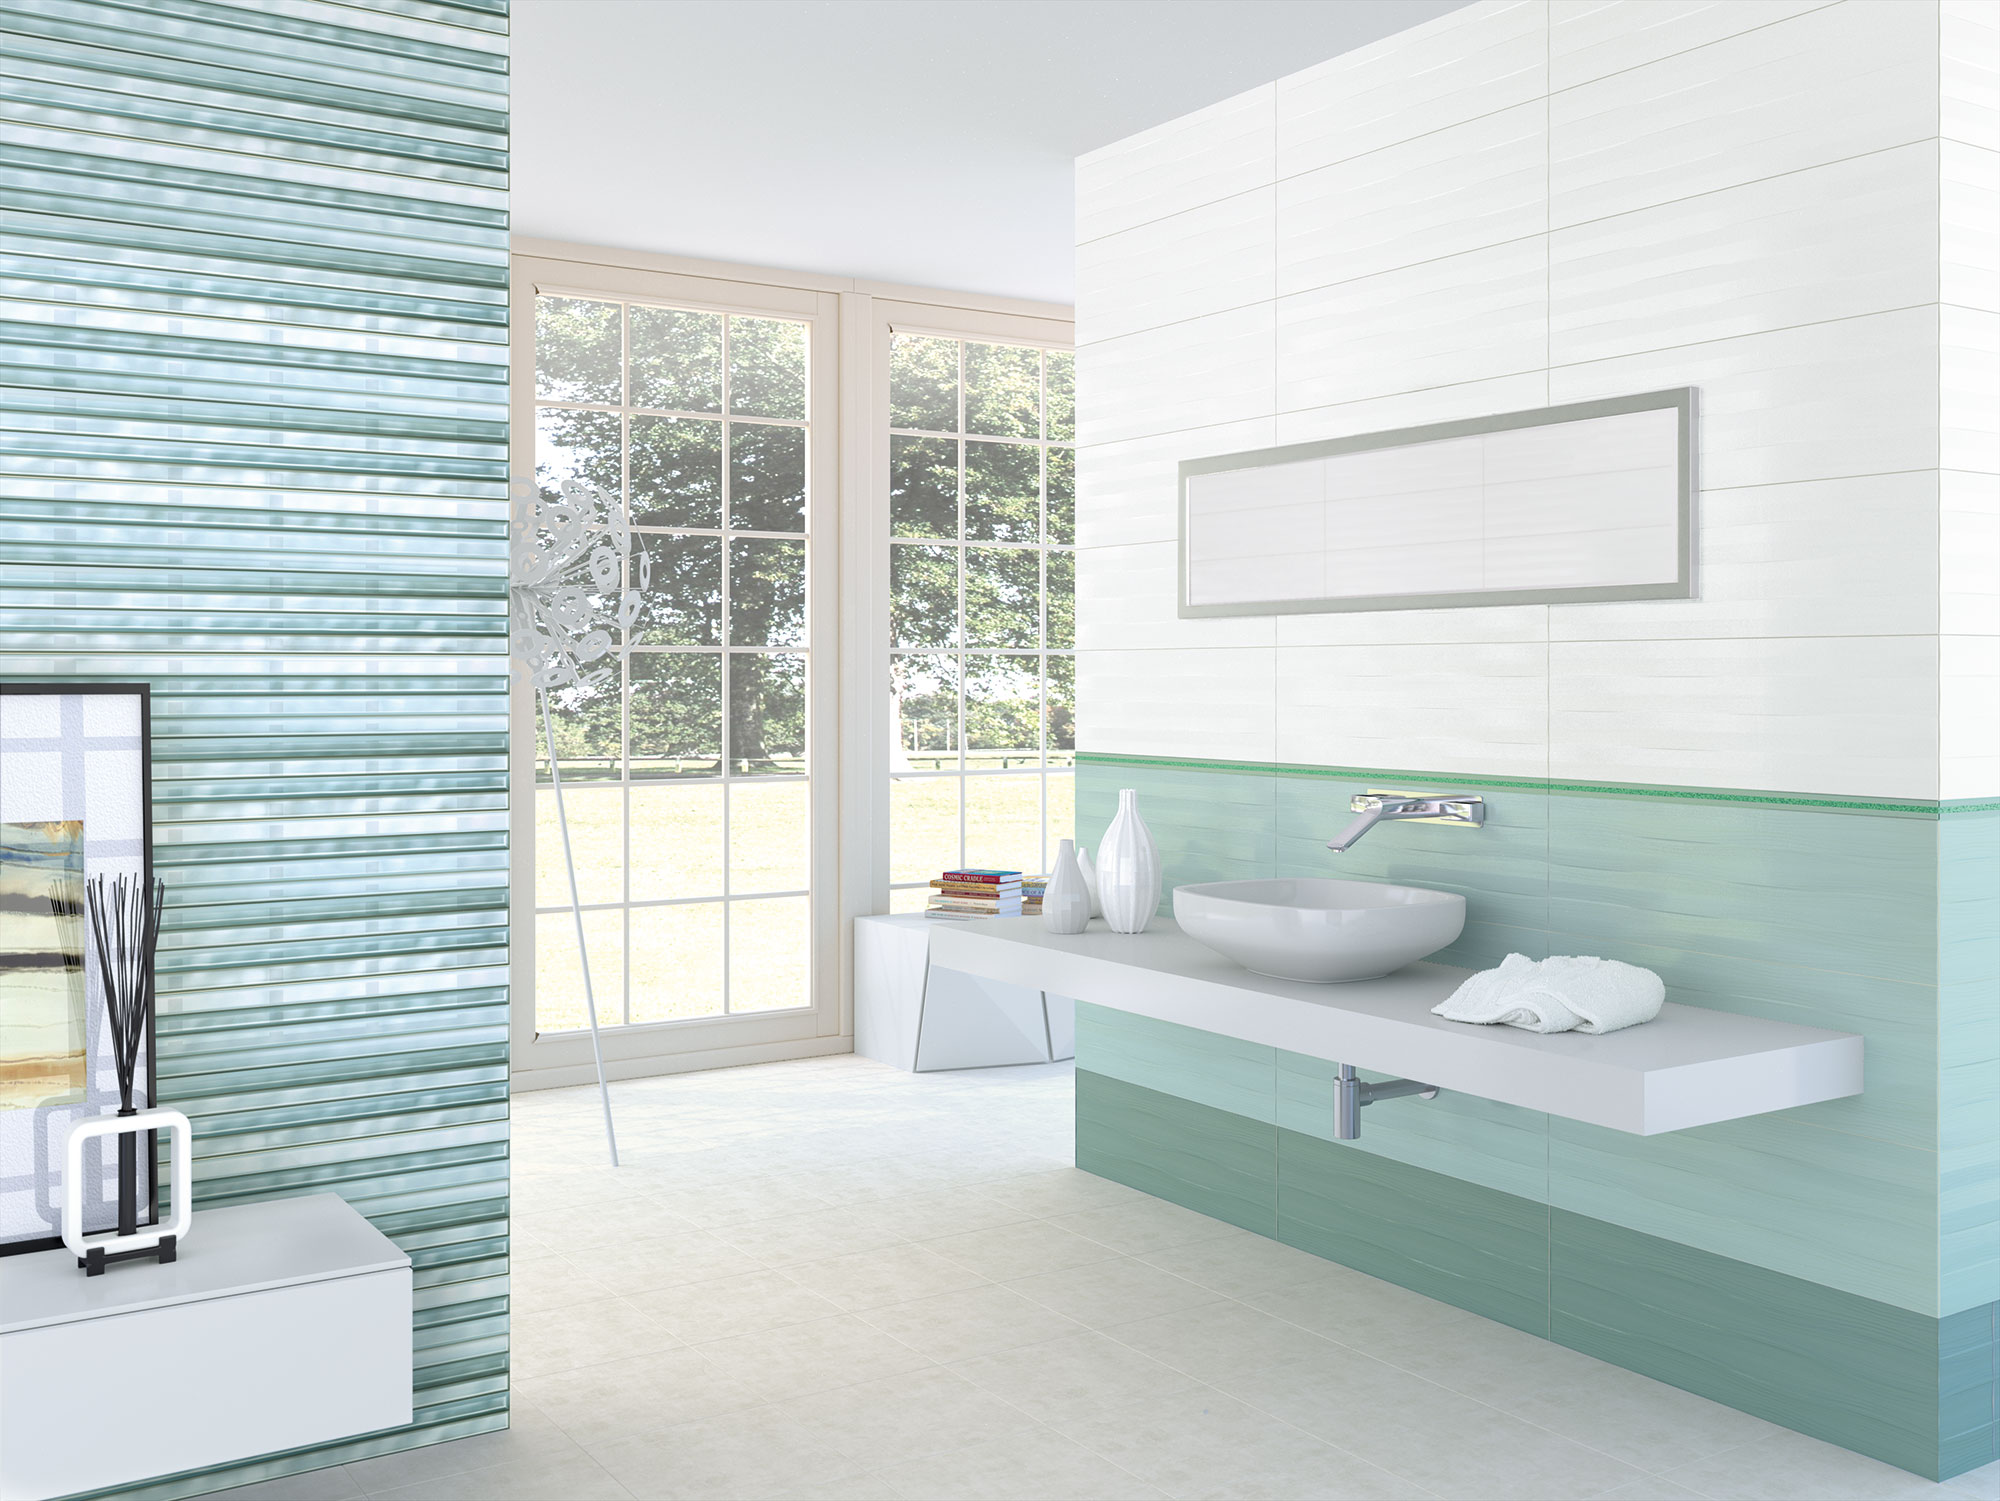 An open bathroom with a light turquoise interior